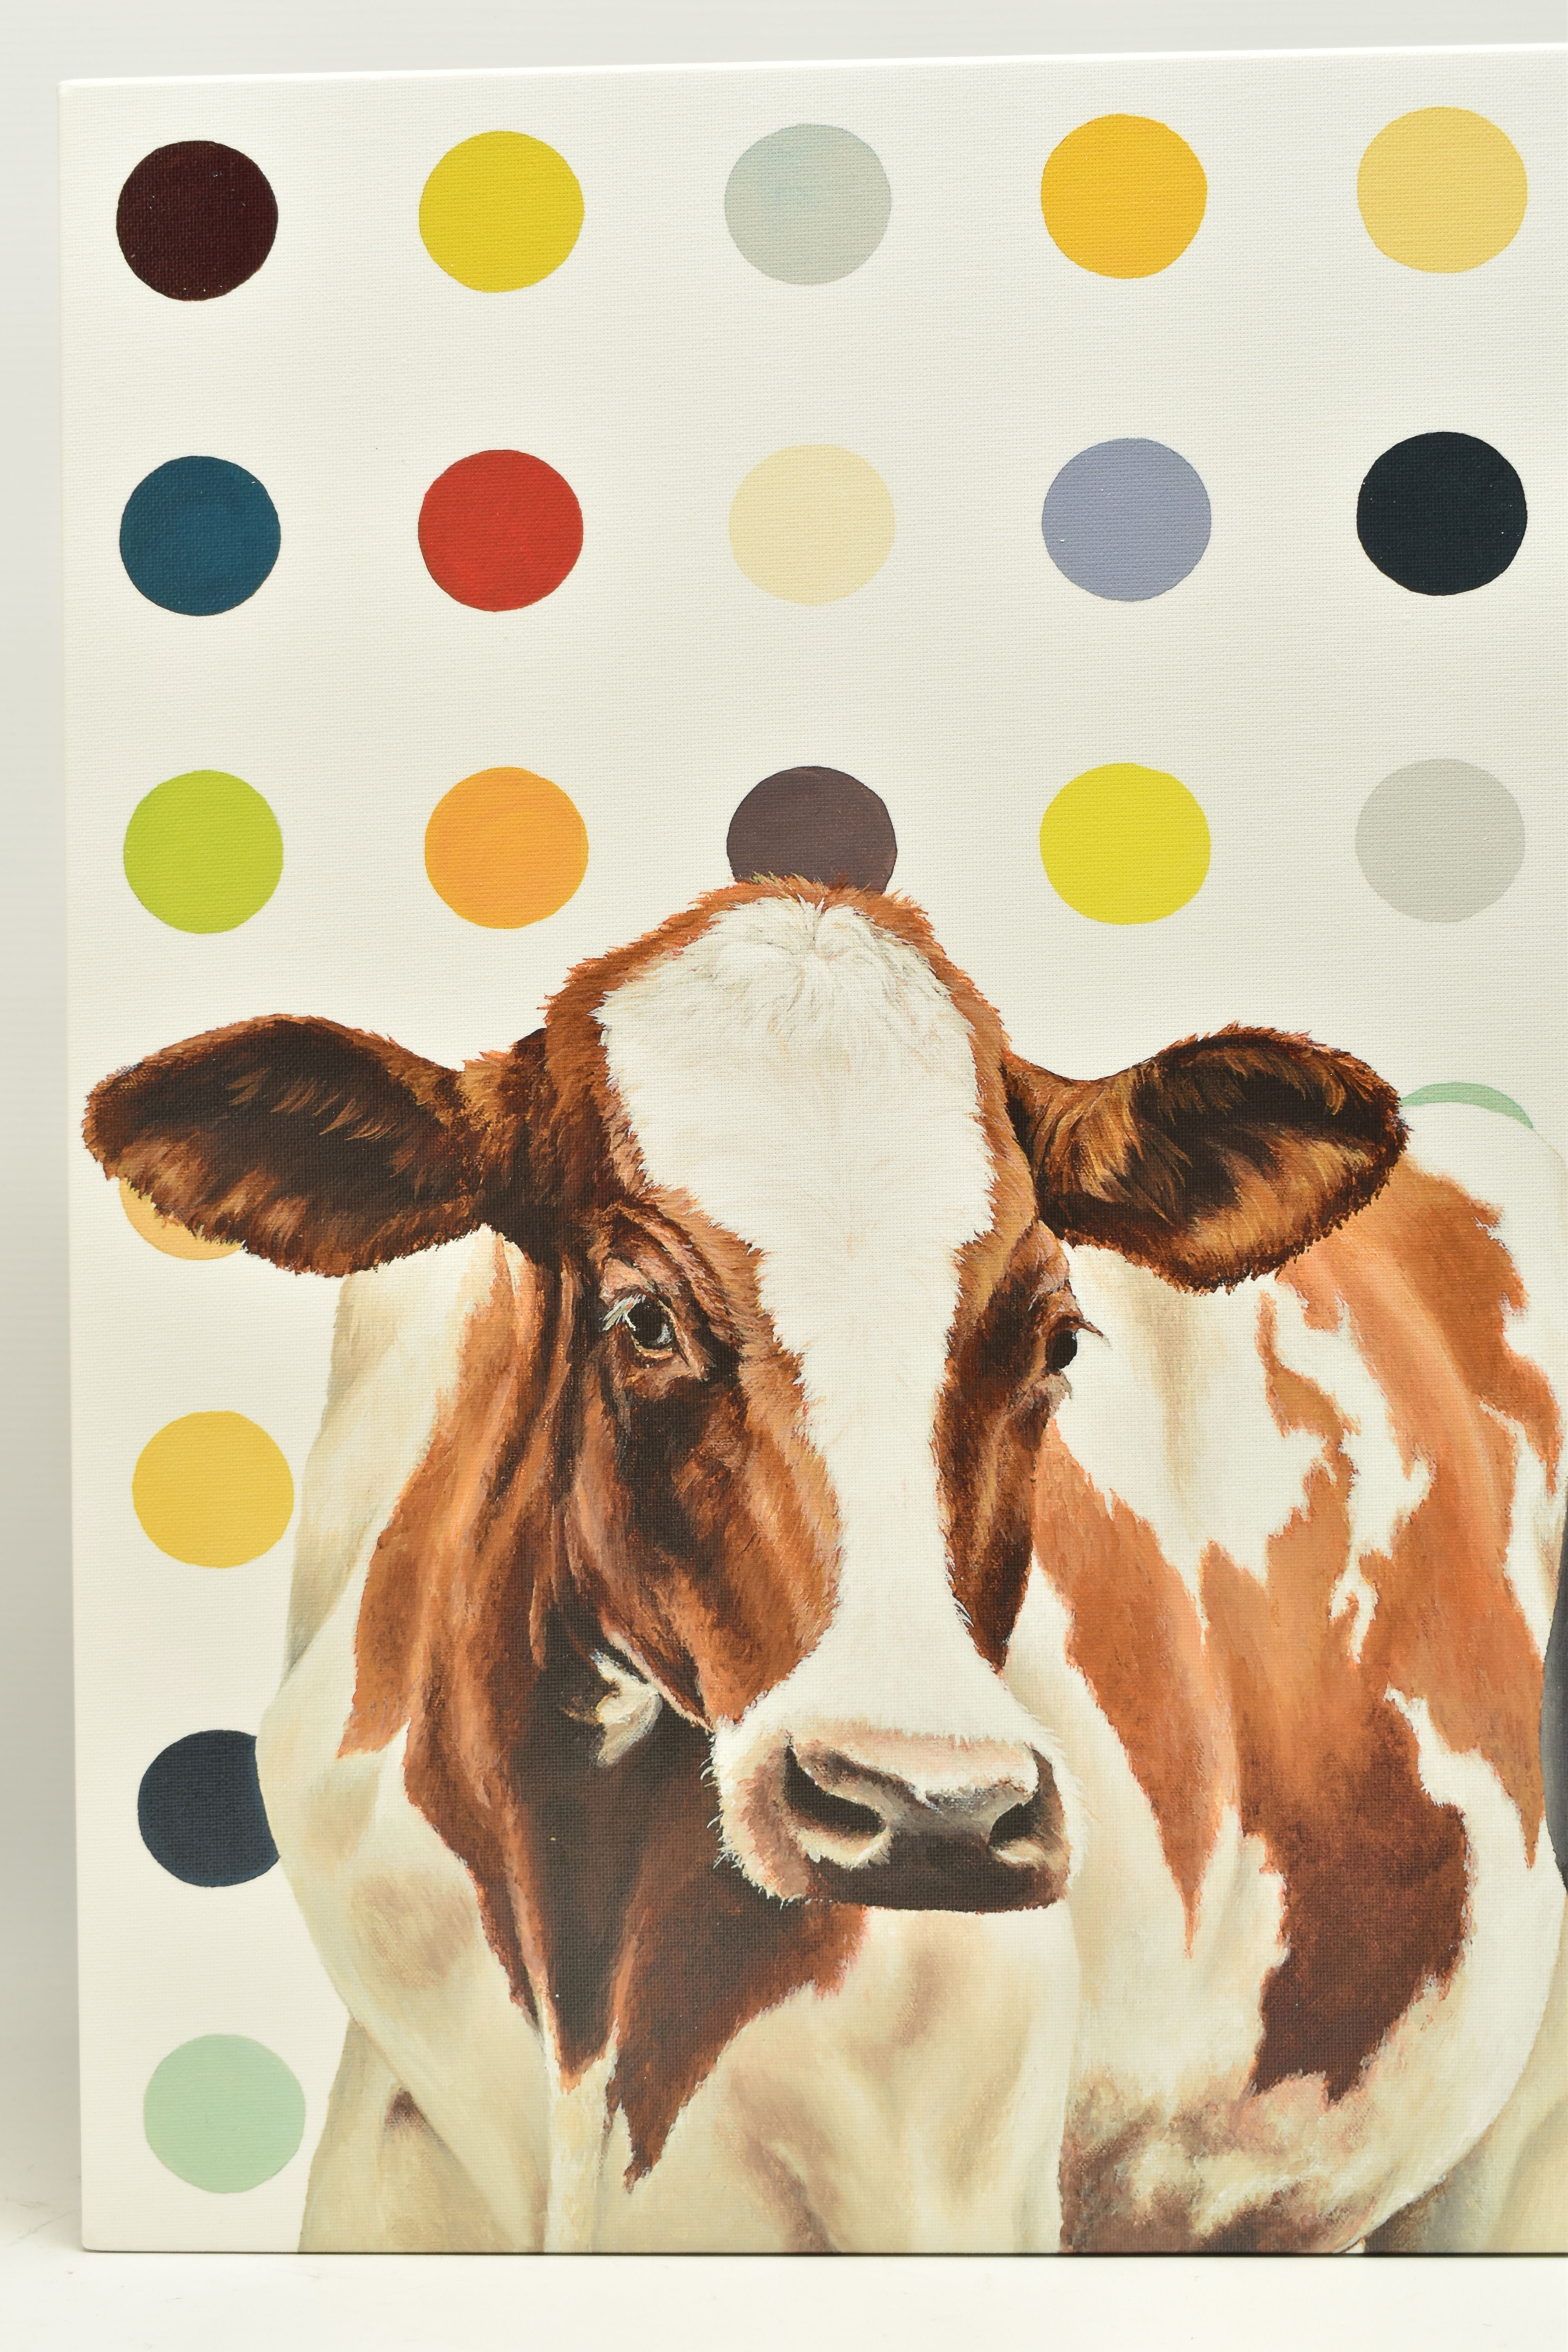 HAYLEY GOODHEAD (BRITISH CONTEMPORARY) 'DAMIEN'S HERD', a limited edition box canvas print depicting - Image 4 of 5